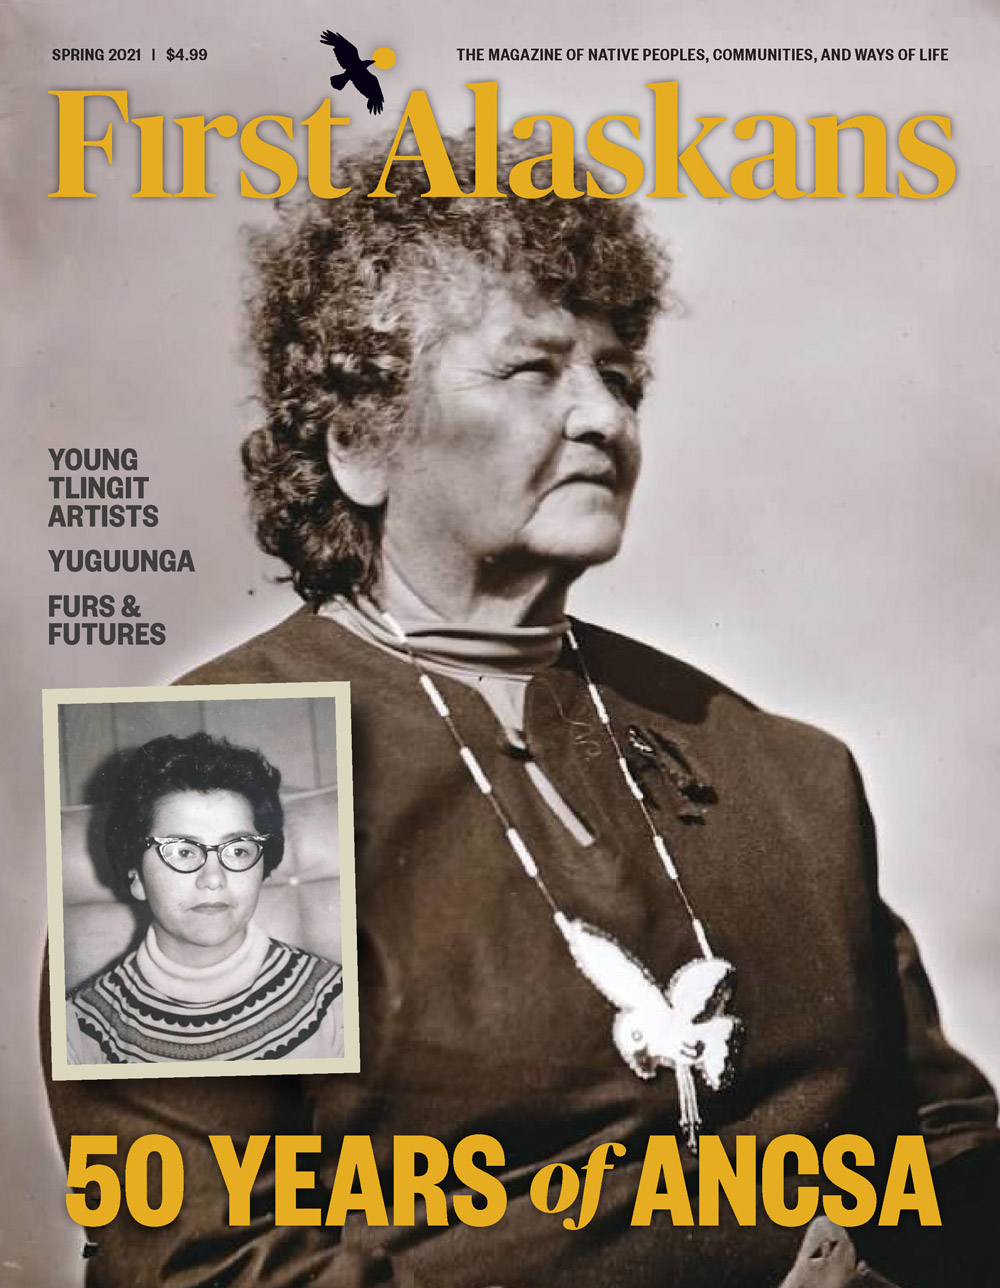 Rico Lanáat’ Worl on the cover of First Alaskans' Spring 2021 cover